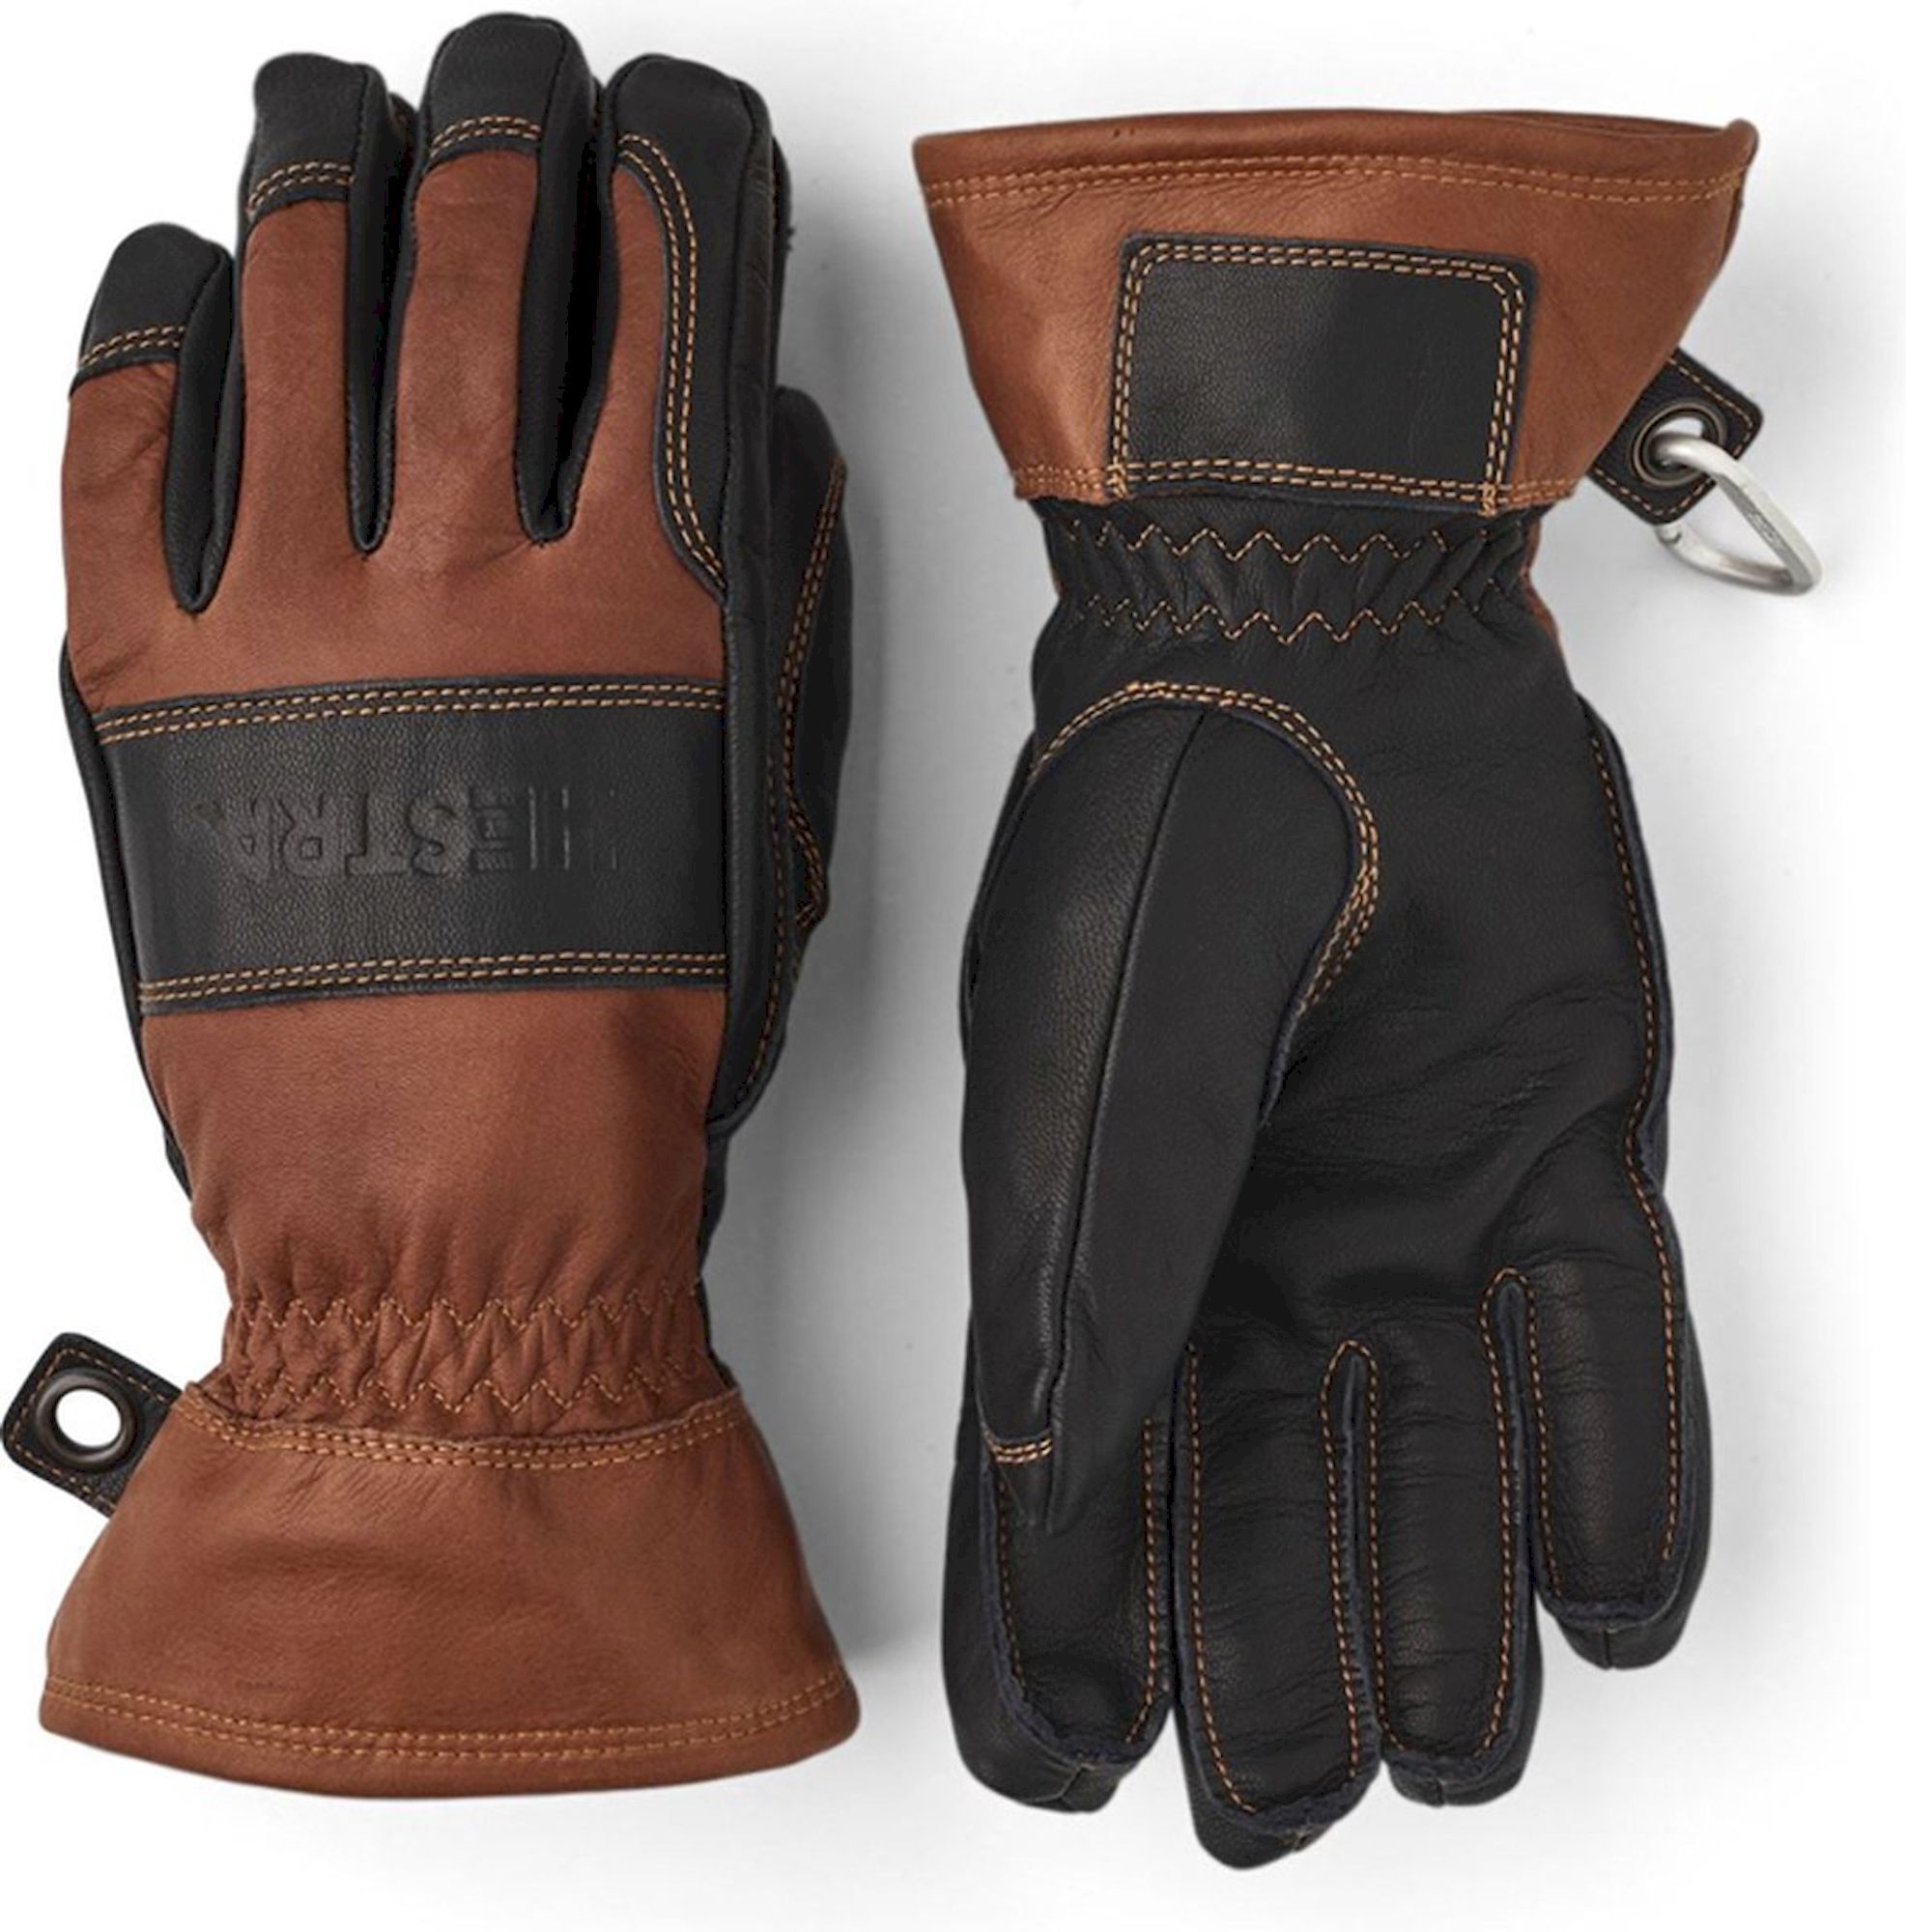 Hestra Mujeres Fall Line Guantes Esquí